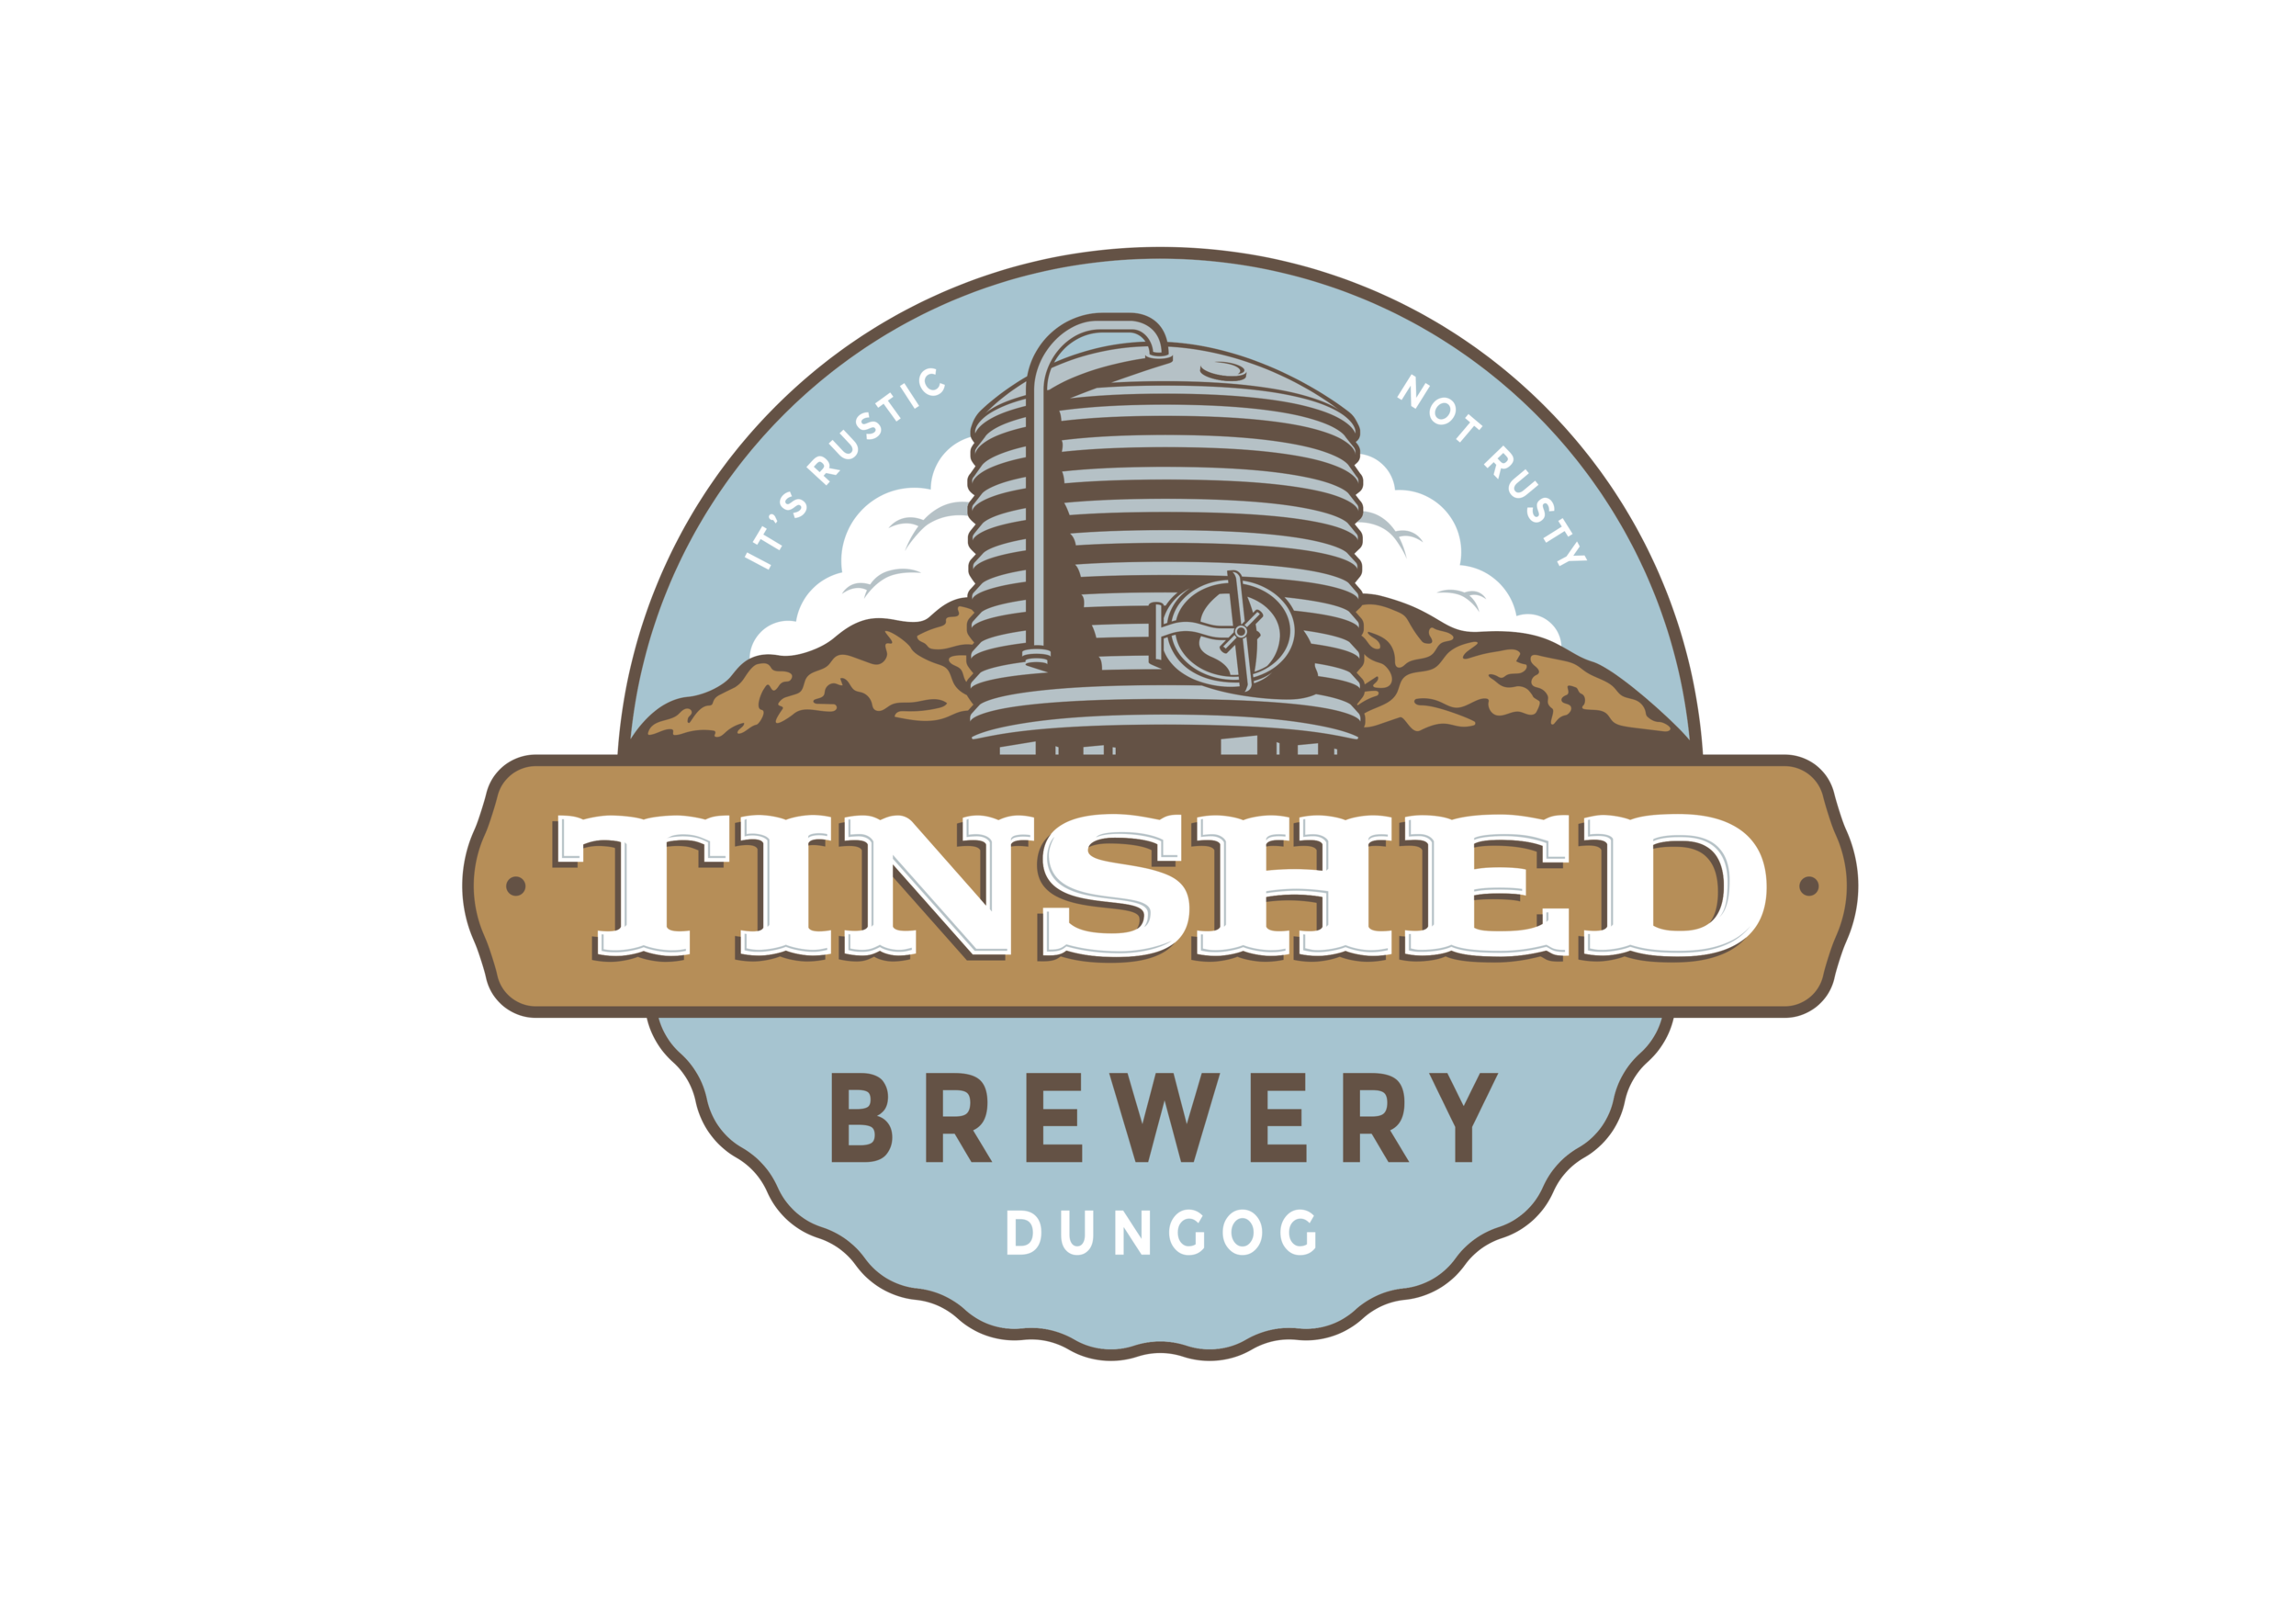 Tinshed Brewery